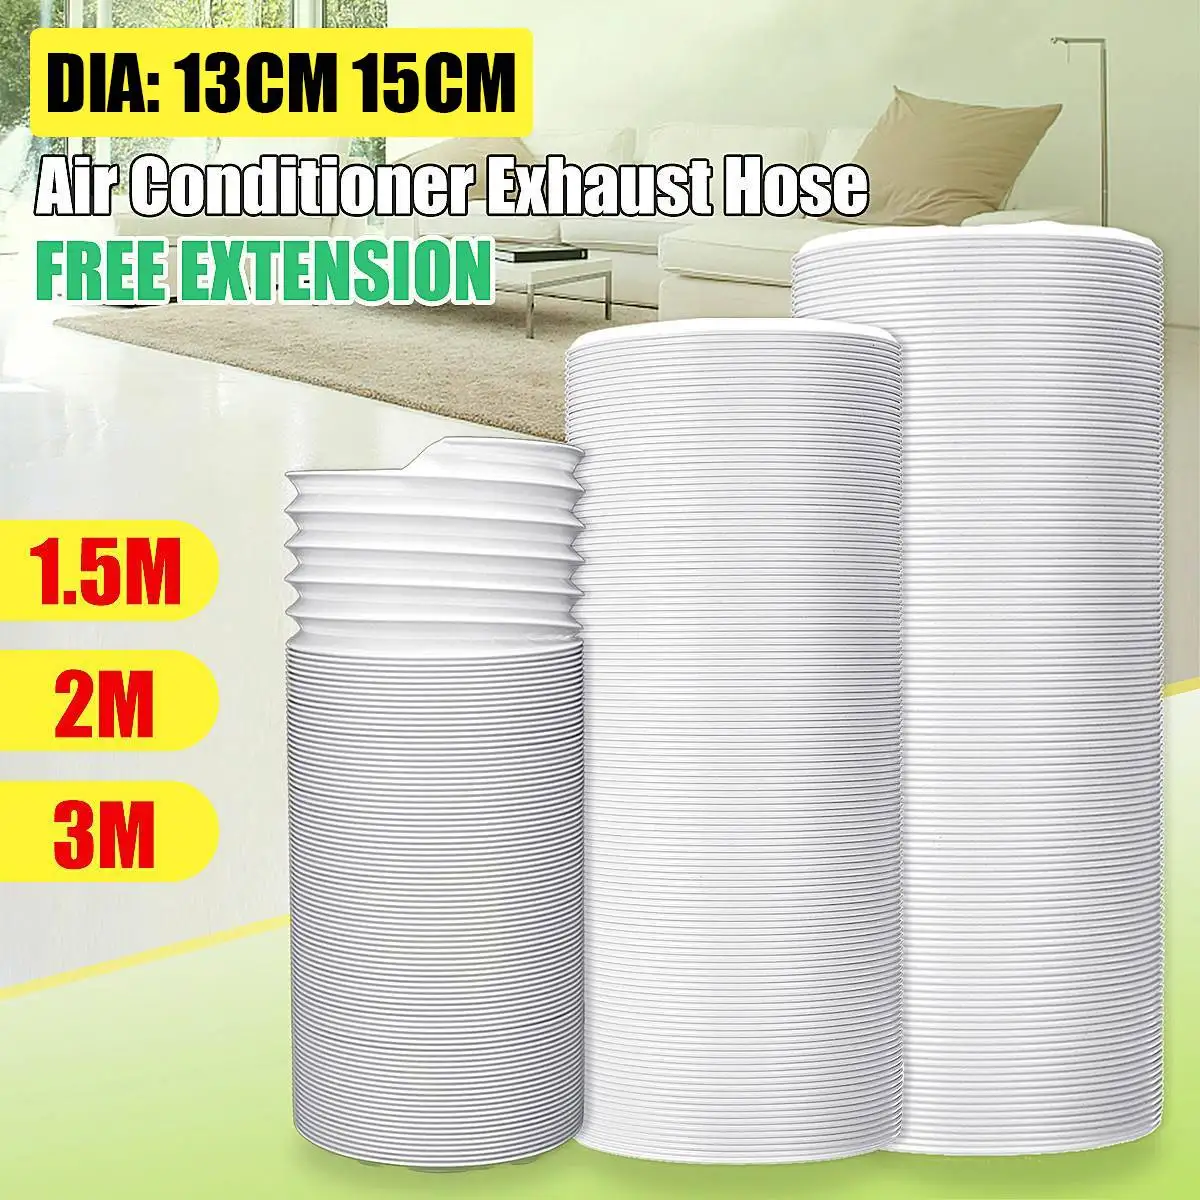 3m /5.9 inches Exhaust Hose for Portable Air Conditioner 1.5m/2m/3m Exhaust Hose 13cm/15cm Diametere Free Extension for Air Conditioner 